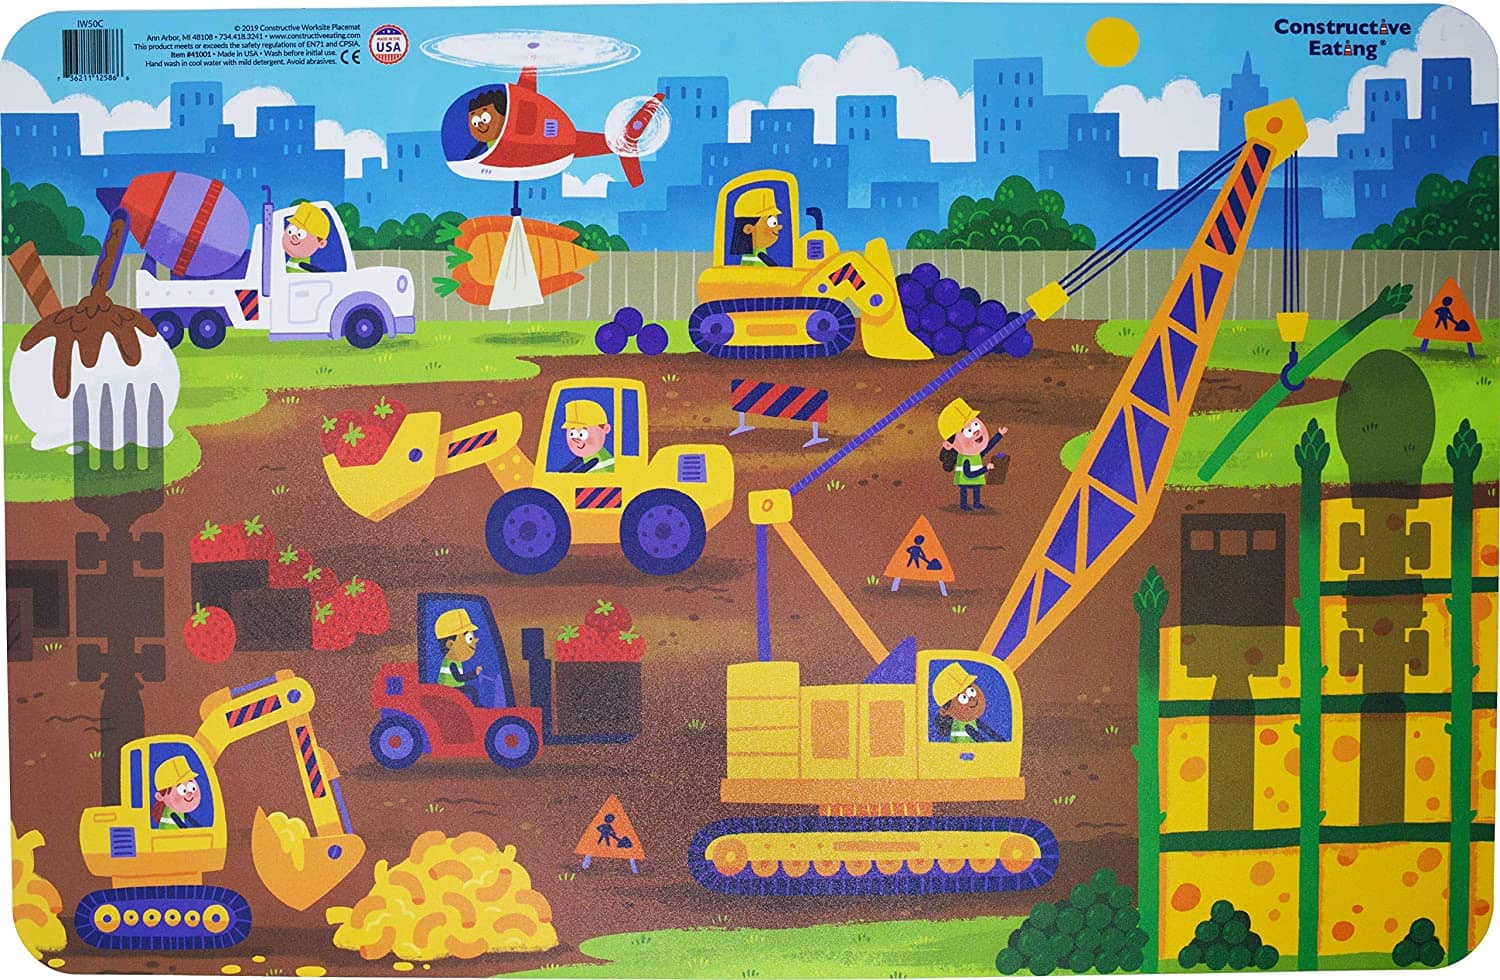 The Construction Placemat features a landscape view of a construction worksite where 8 construction workers are busy building the perfect house! Each construction "material" is a mixture of healthy and delicious foods, such as mac and cheese being picked up by an excavator, strawberries bring transported by a forklift, blueberries being moved by a bulldozer, carrots being transported by helicopters, the asparagus walls of the house, cheesy house filling, or the delicious backyard ice cream sundae!